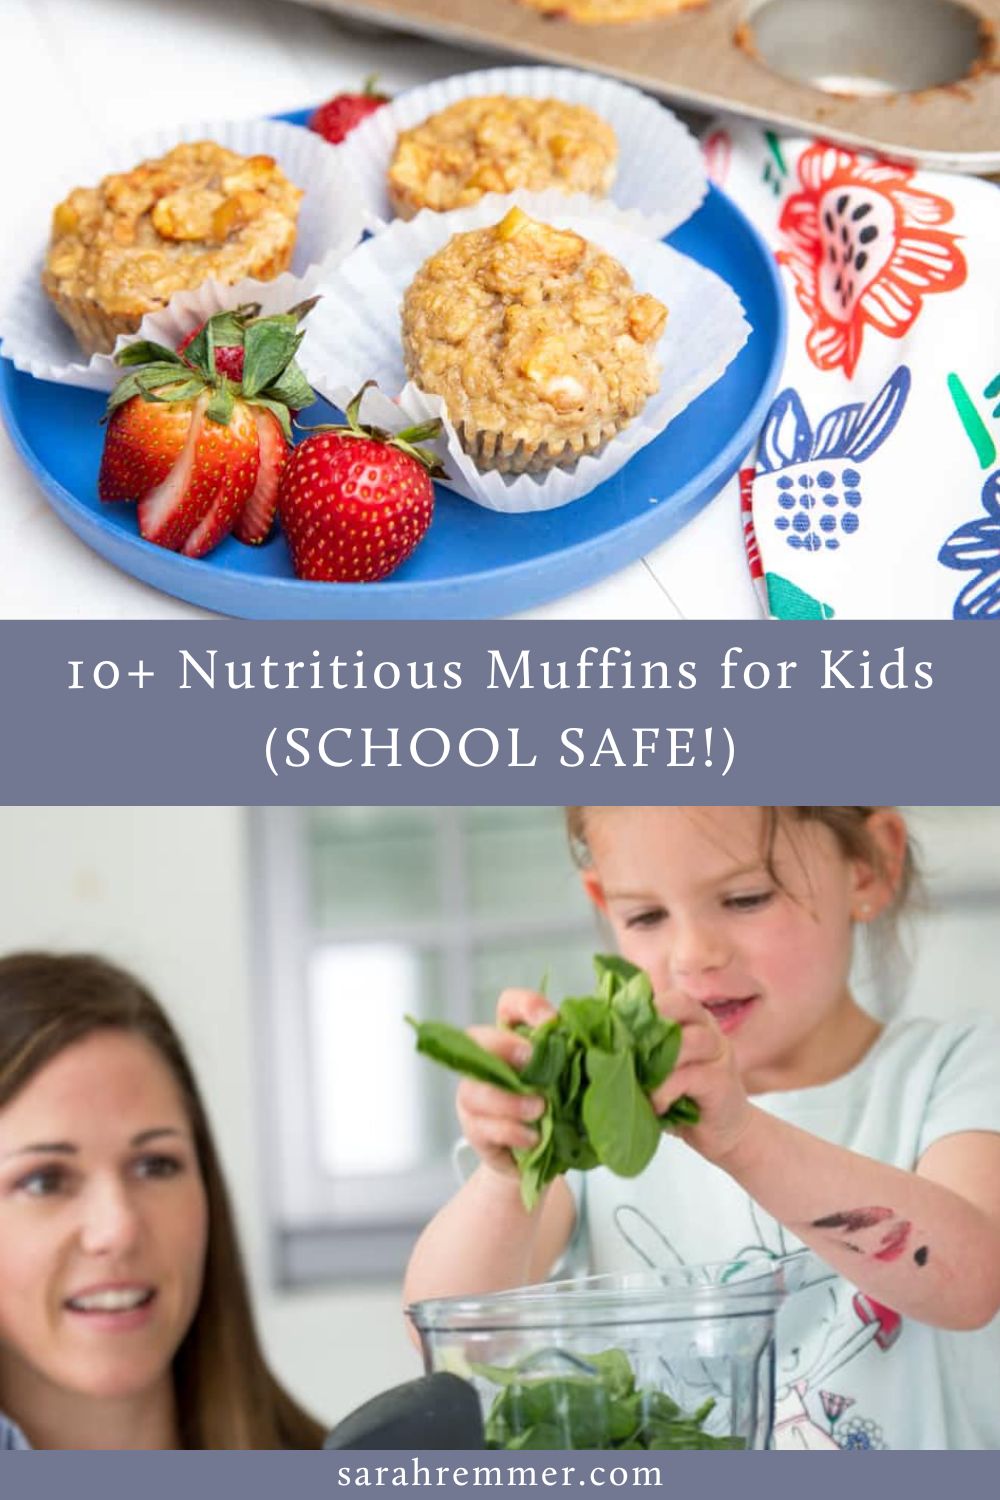 Muffins are the perfect healthy, homemade snack for kids of all ages. I rounded up 10+ nutritious muffins for kids that are also school safe!